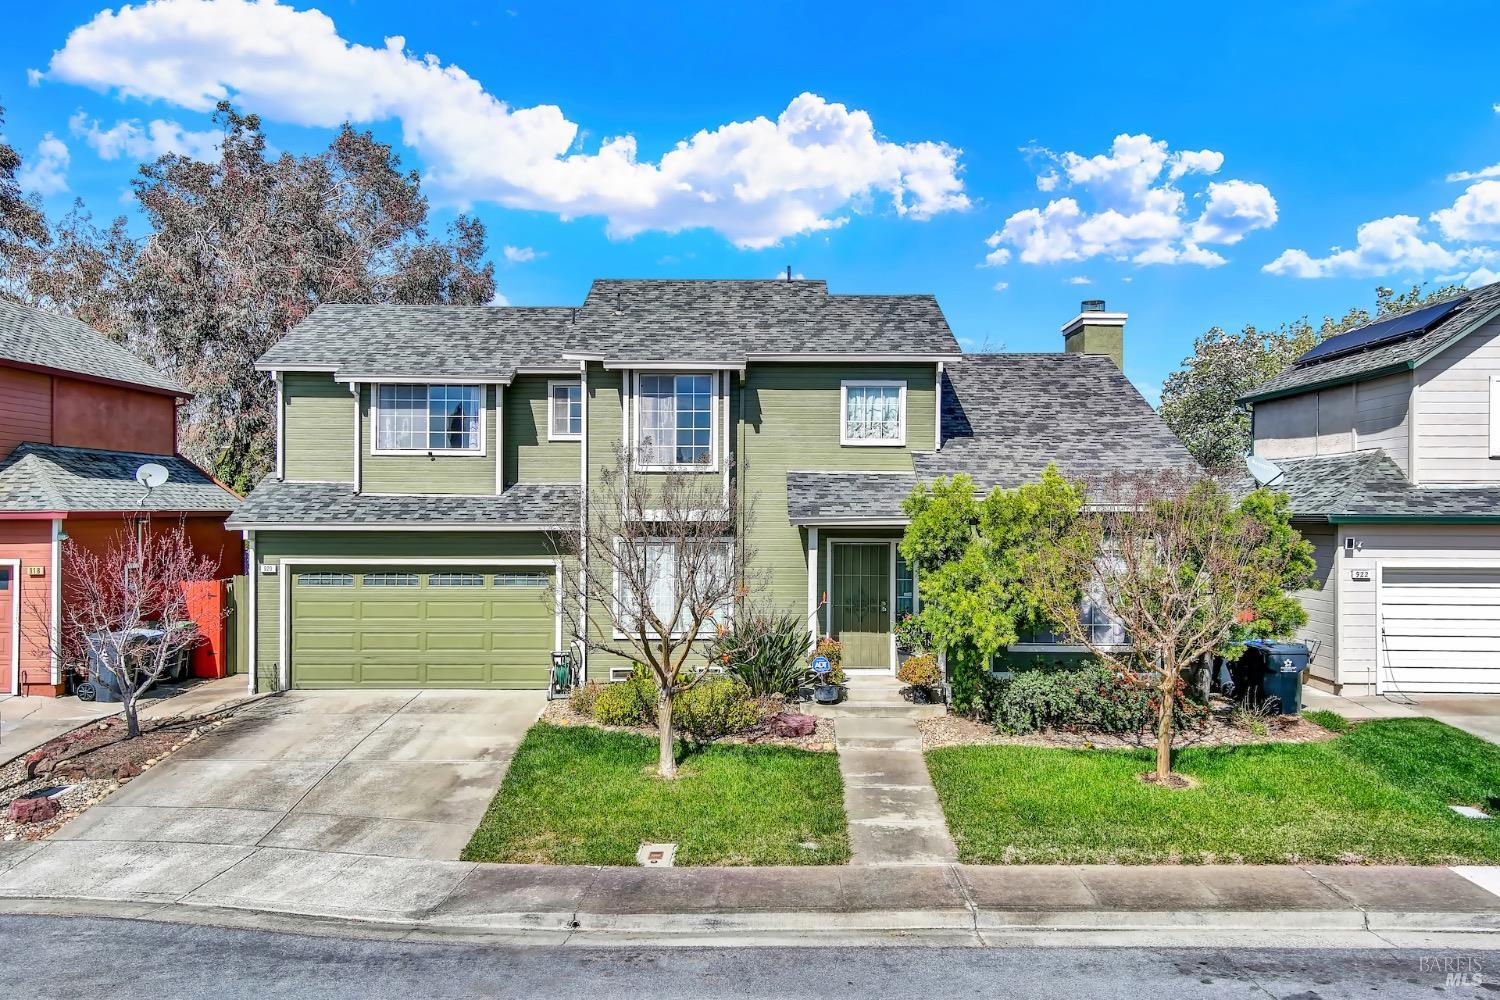 Photo of 920 Limewood St in Suisun City, CA